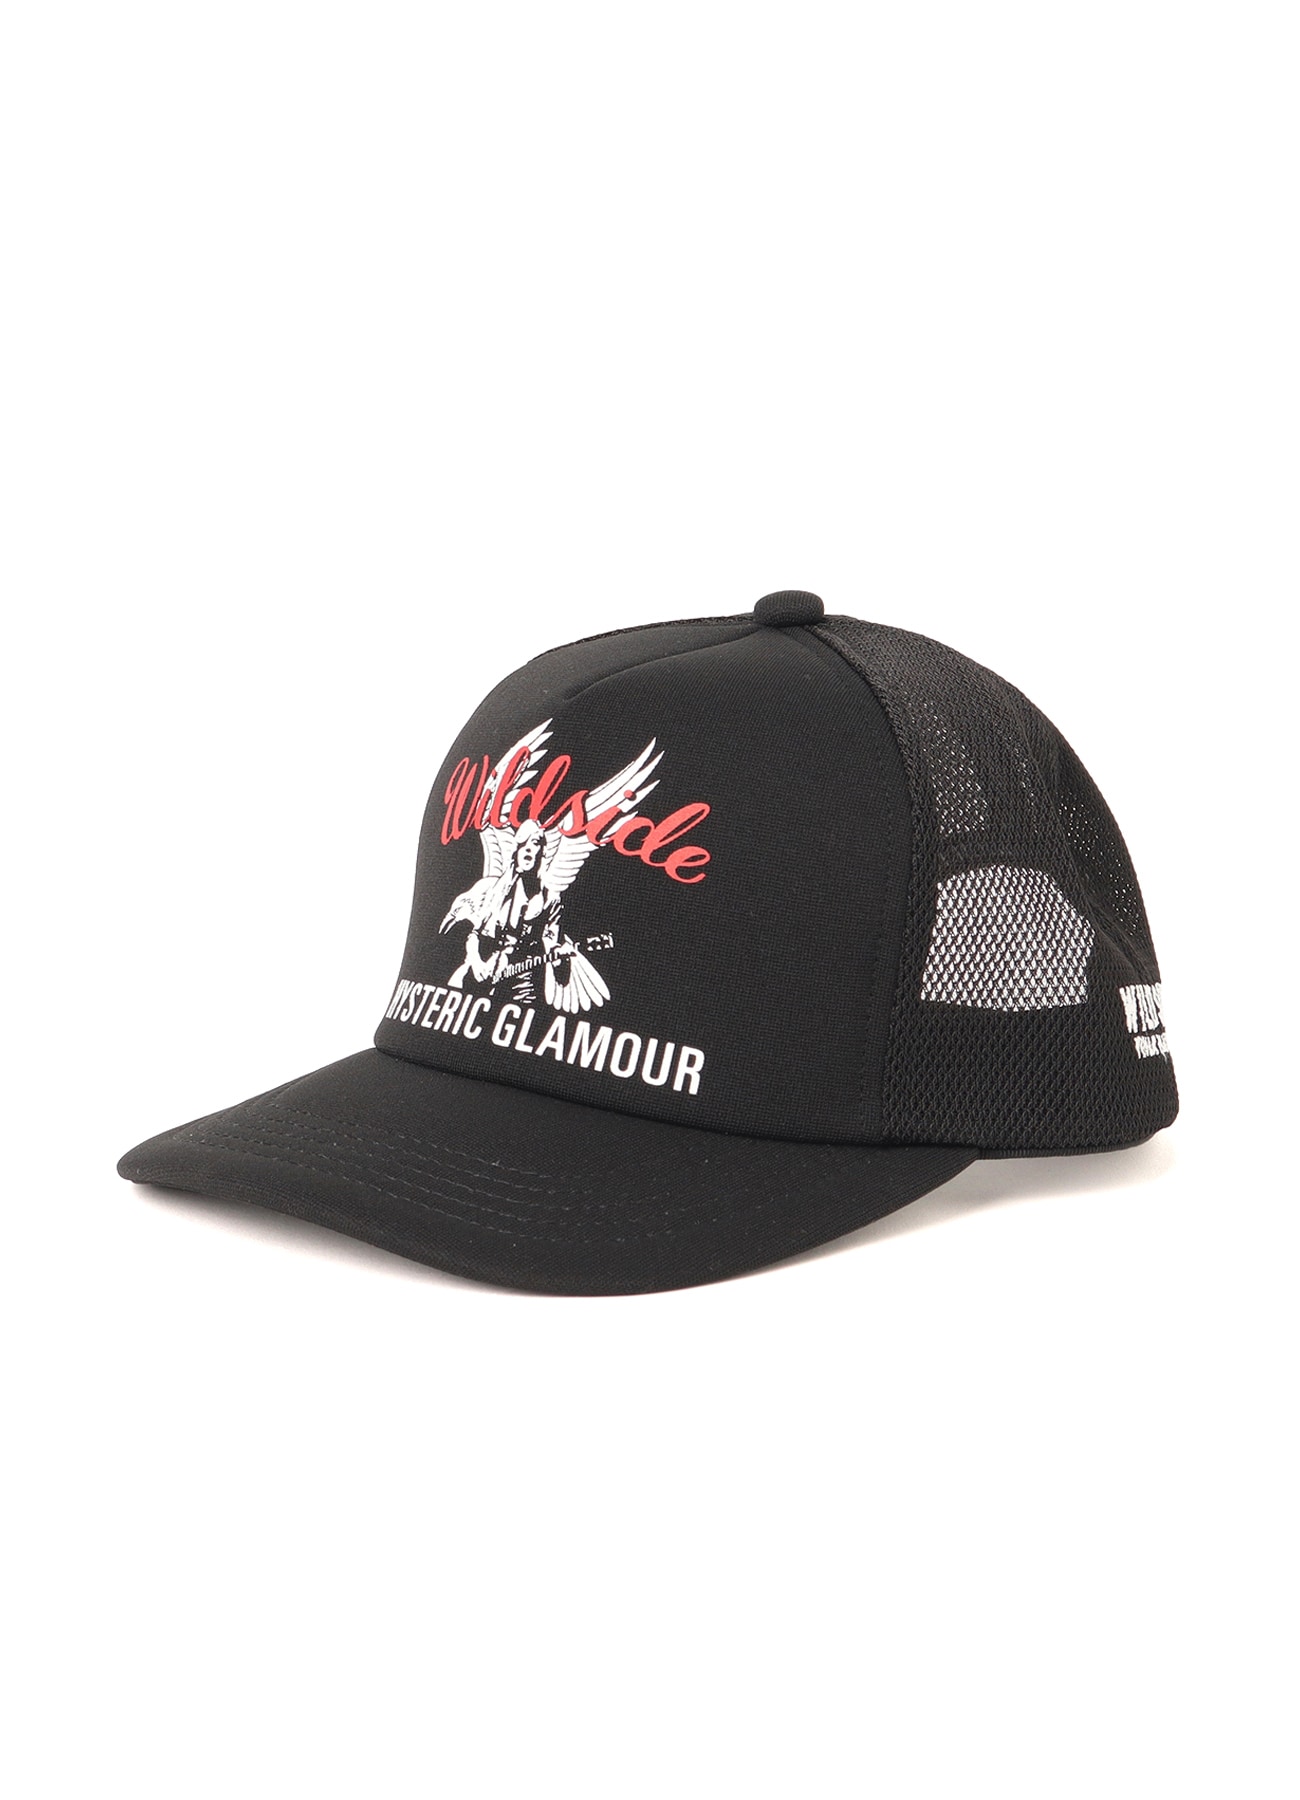 【4/20 12:00 Release】WILDSIDE × HYSTERIC GLAMOUR MESH CAP